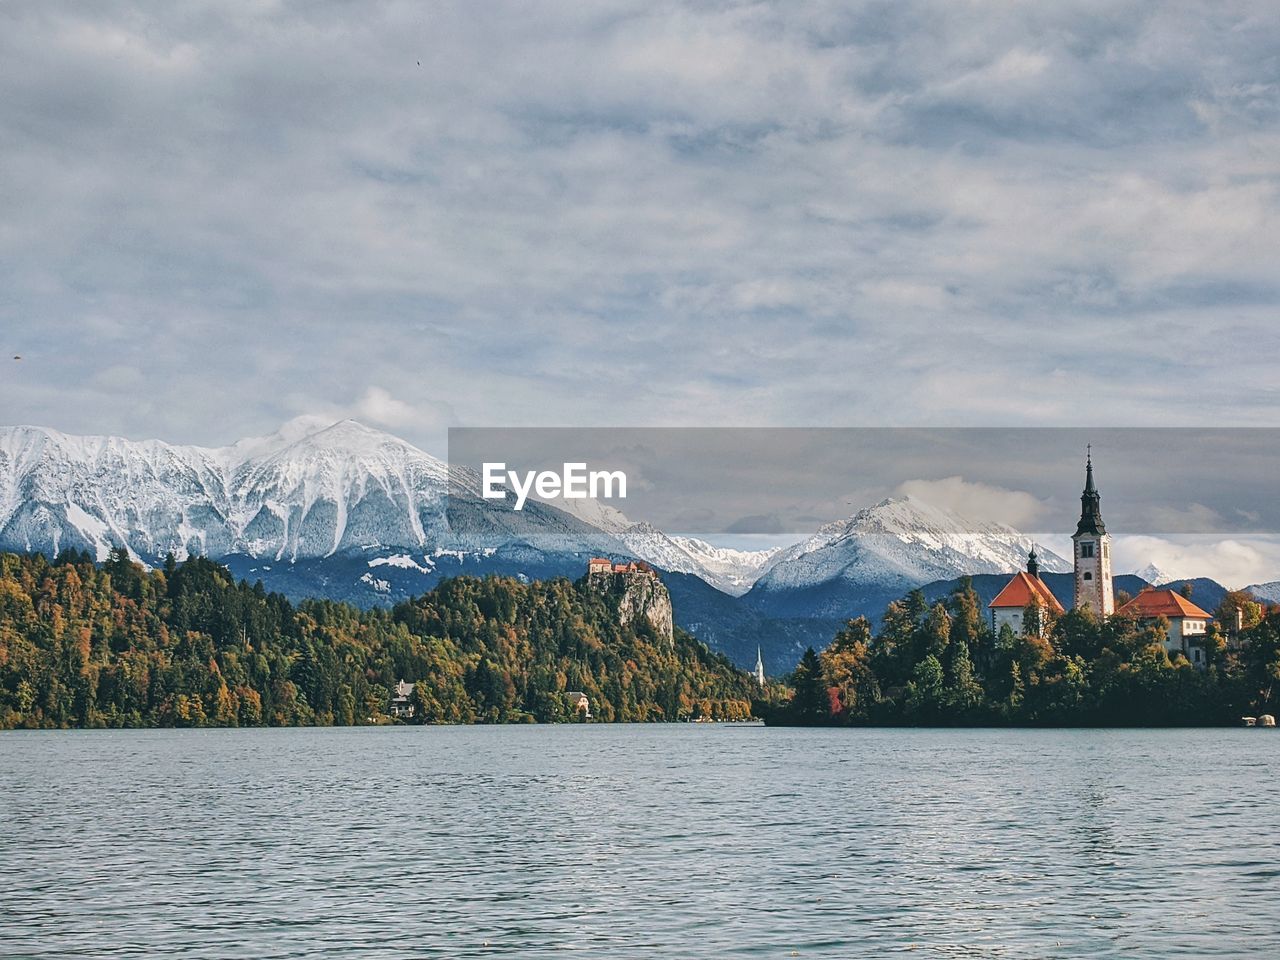 View of the snow-capped mountain peaks against the lake bled.